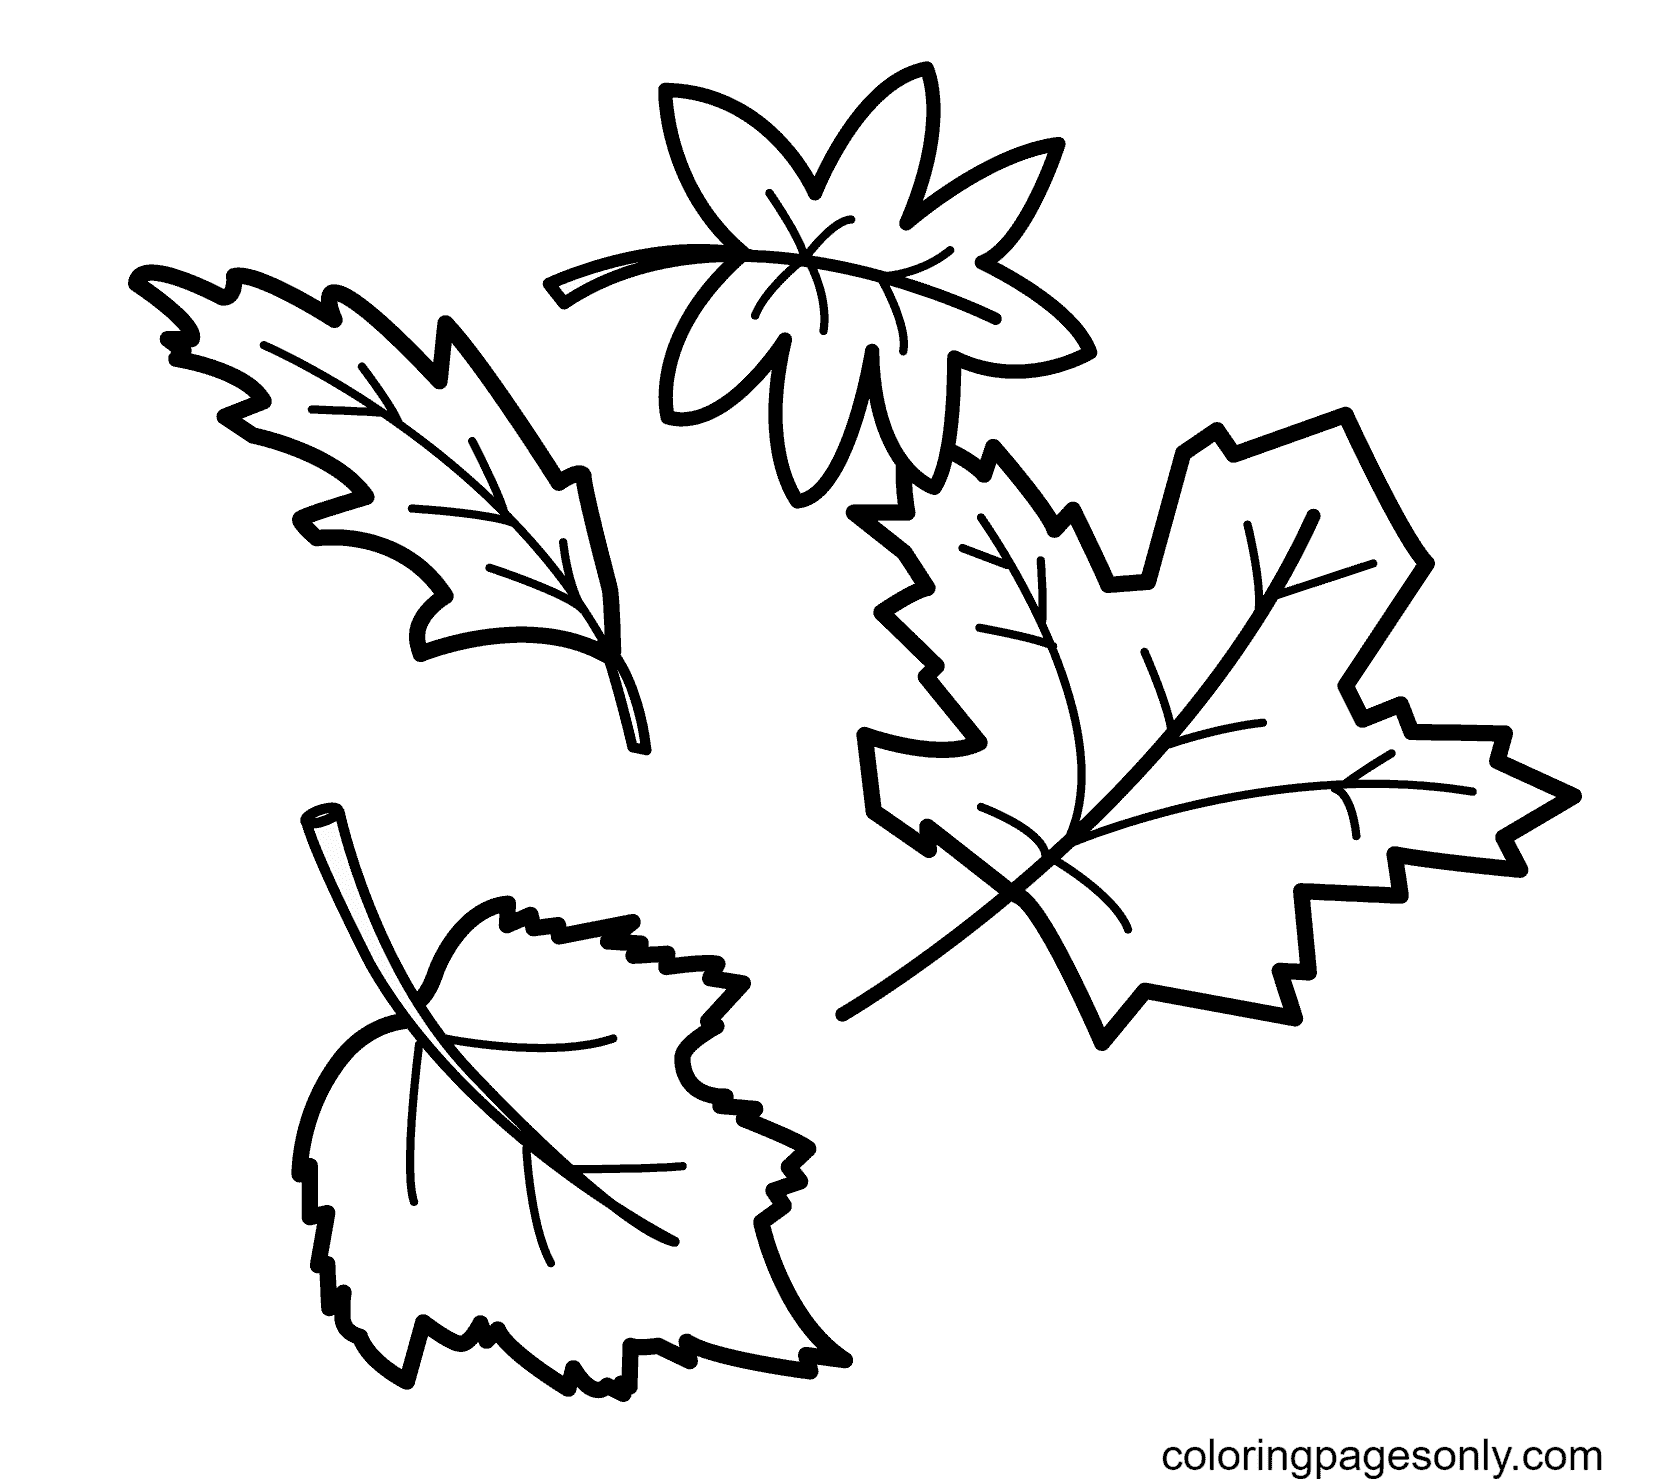 10-best-images-of-fall-leaves-worksheets-pile-of-fall-leaves-coloring